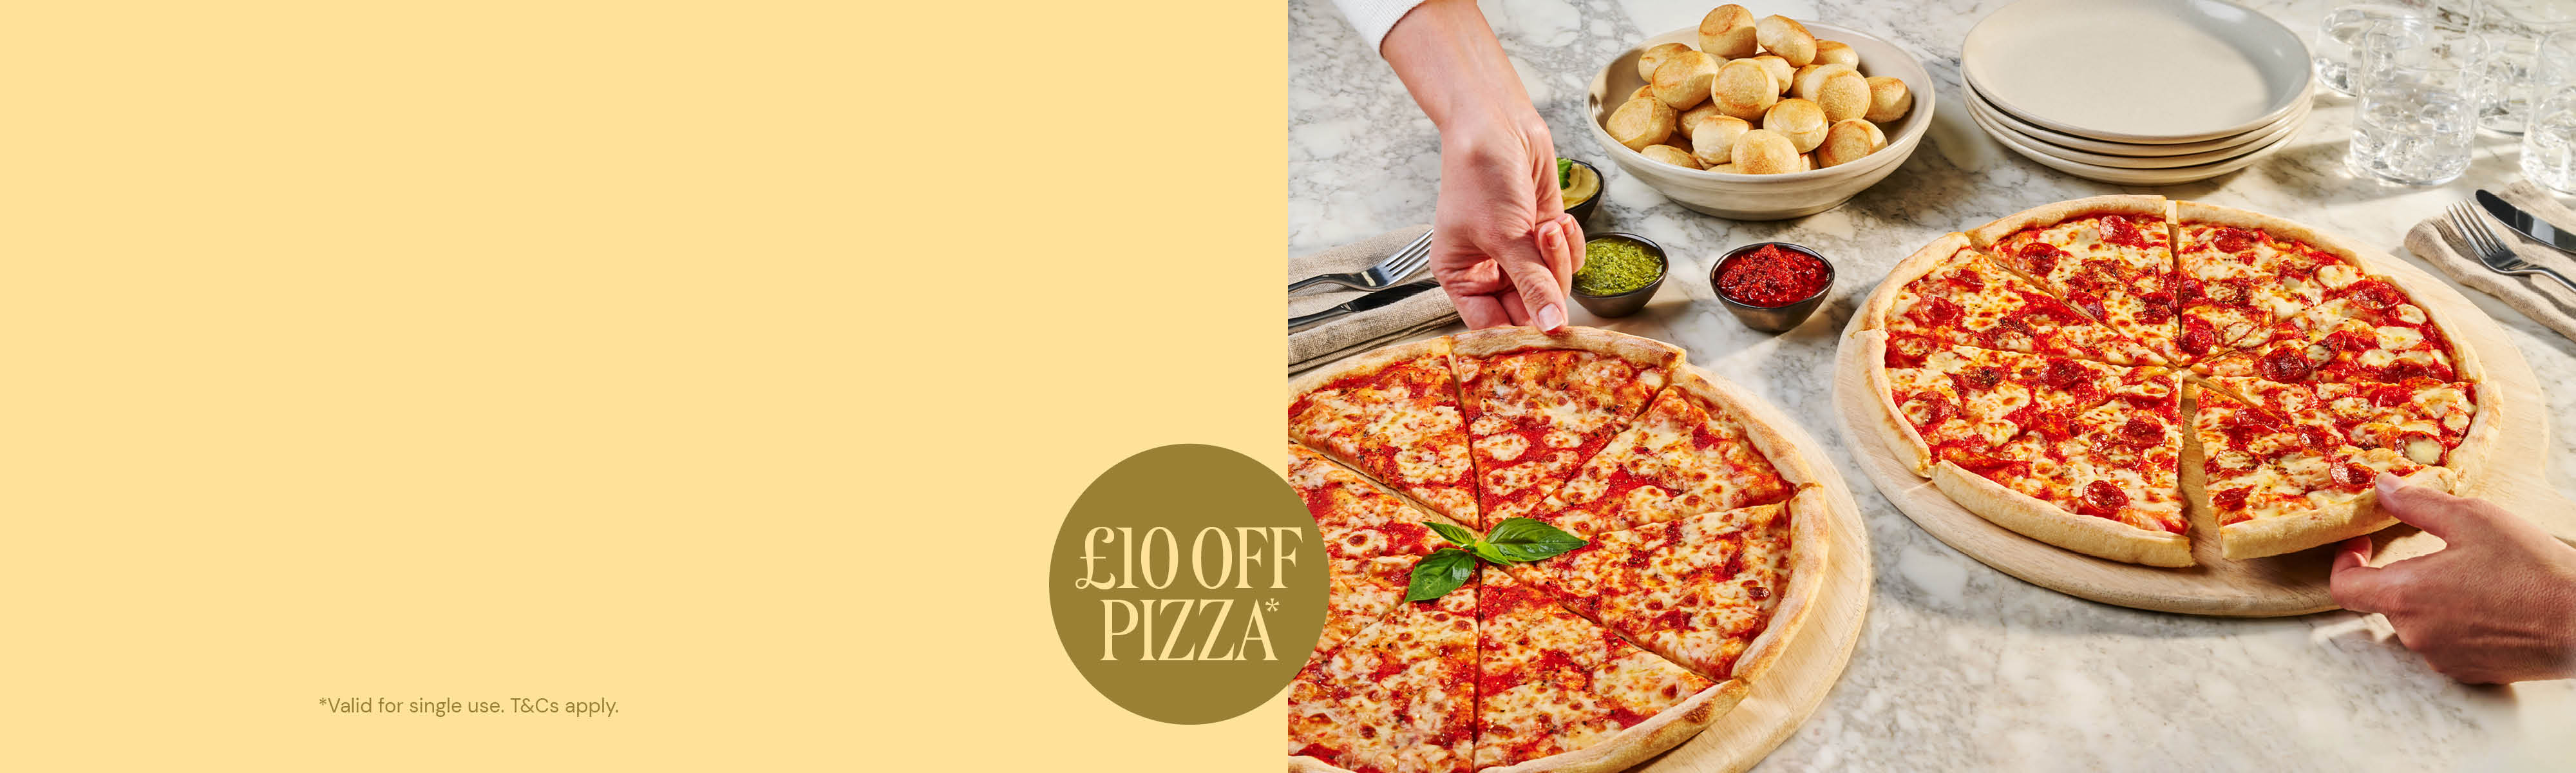 Pizza Express - Avail Up to £10 discount